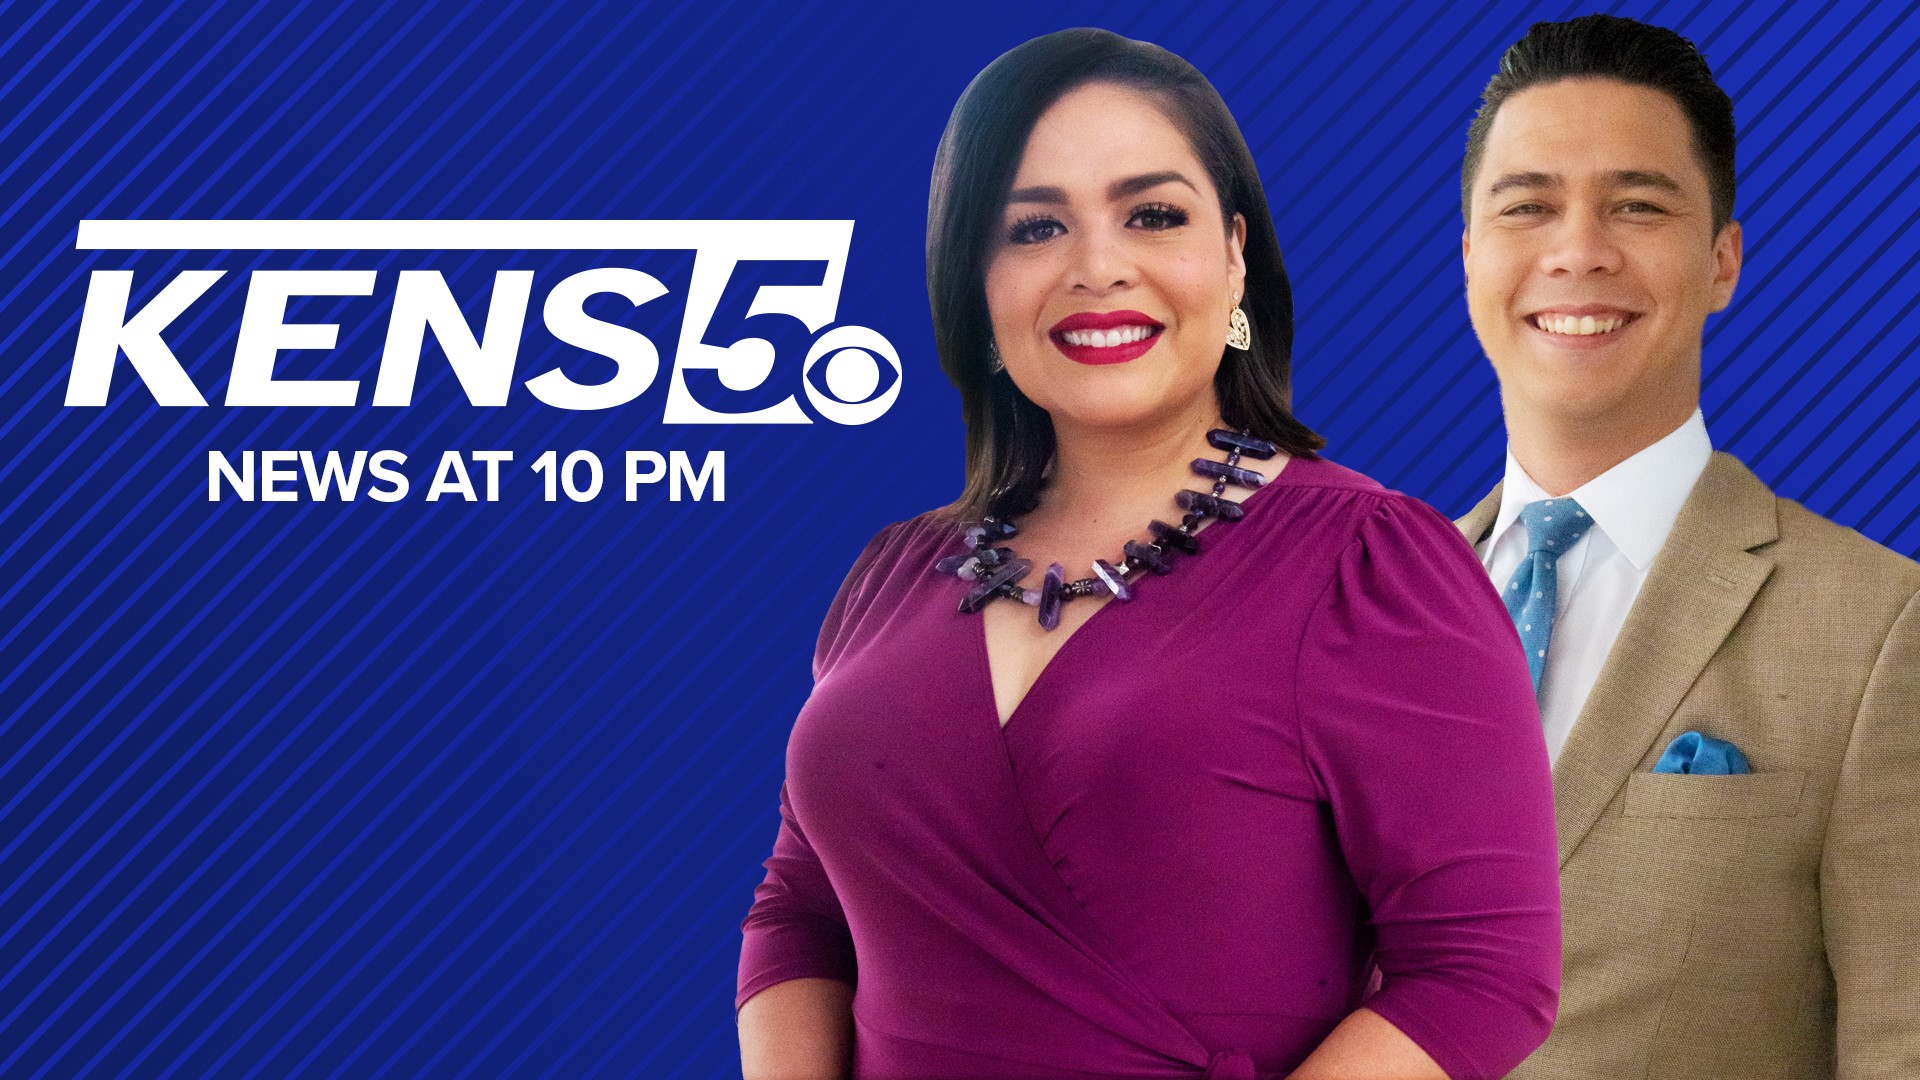 KENS 5 News brings you the latest San Antonio news reports, plus your local weather forecast, sports and traffic updates. 